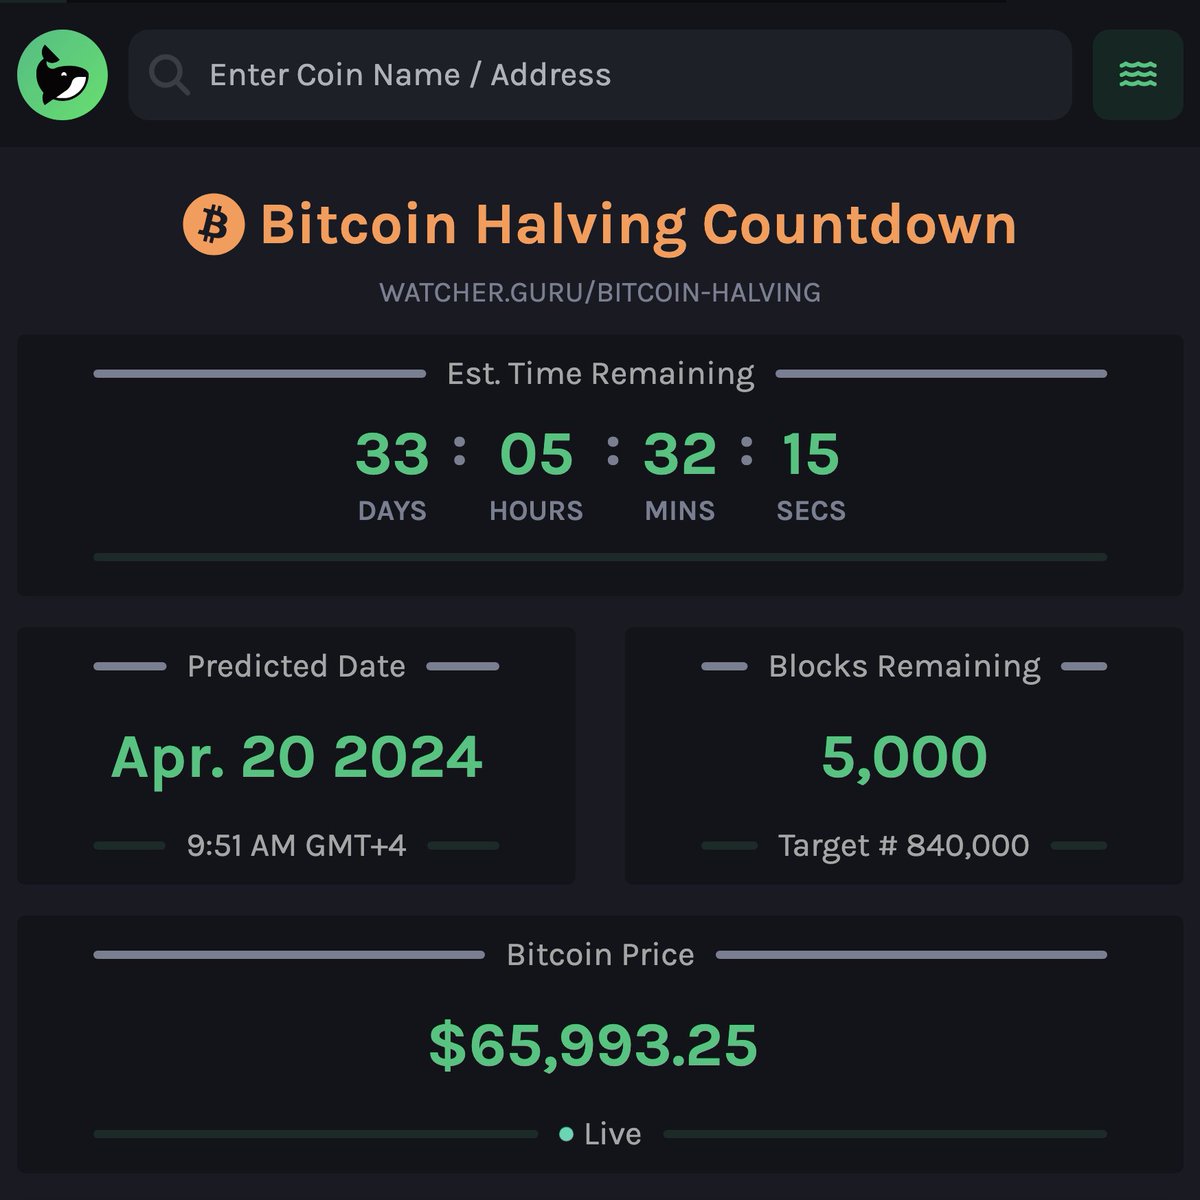 JUST IN: 5,000 blocks remain until #Bitcoin halving.